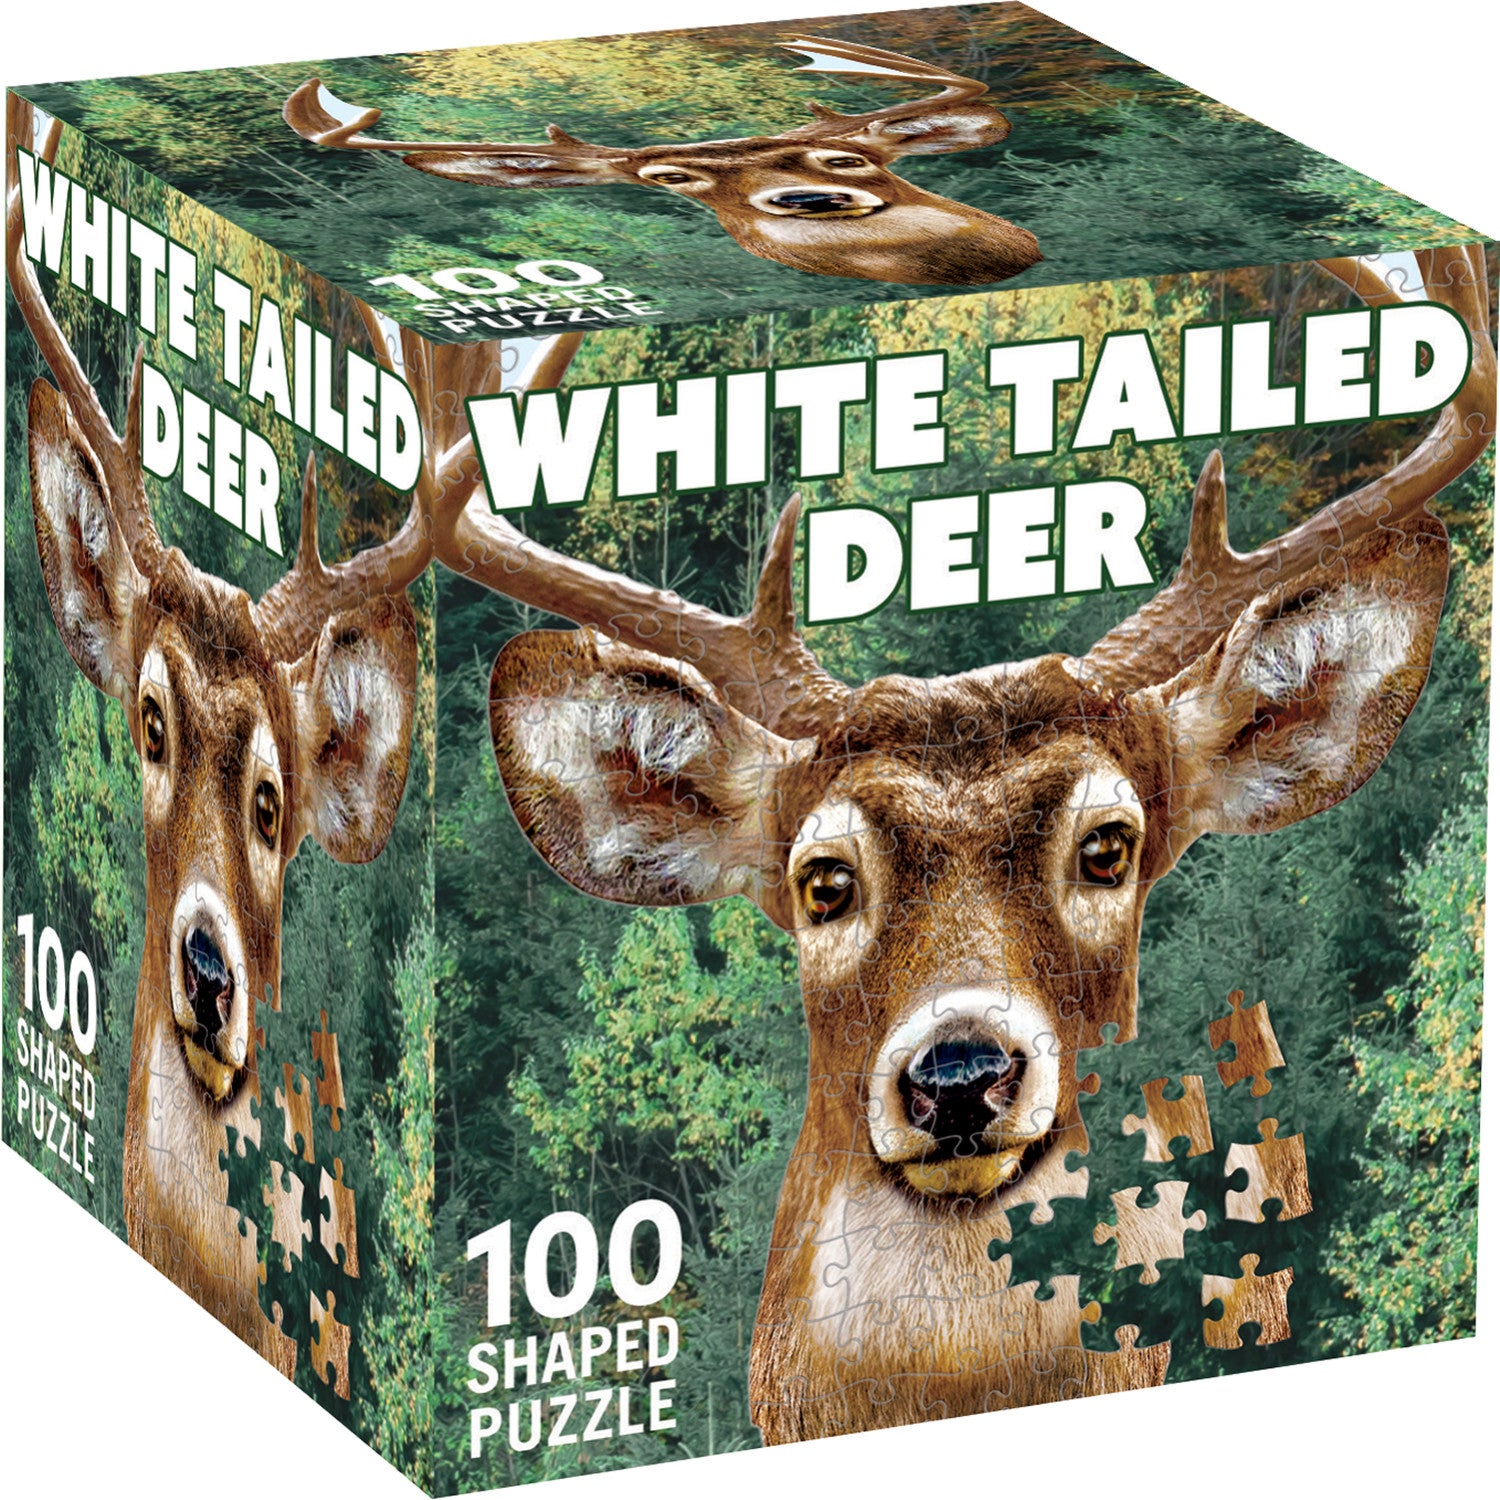 White Tail Deer 100 Piece Shaped Jigsaw Puzzle